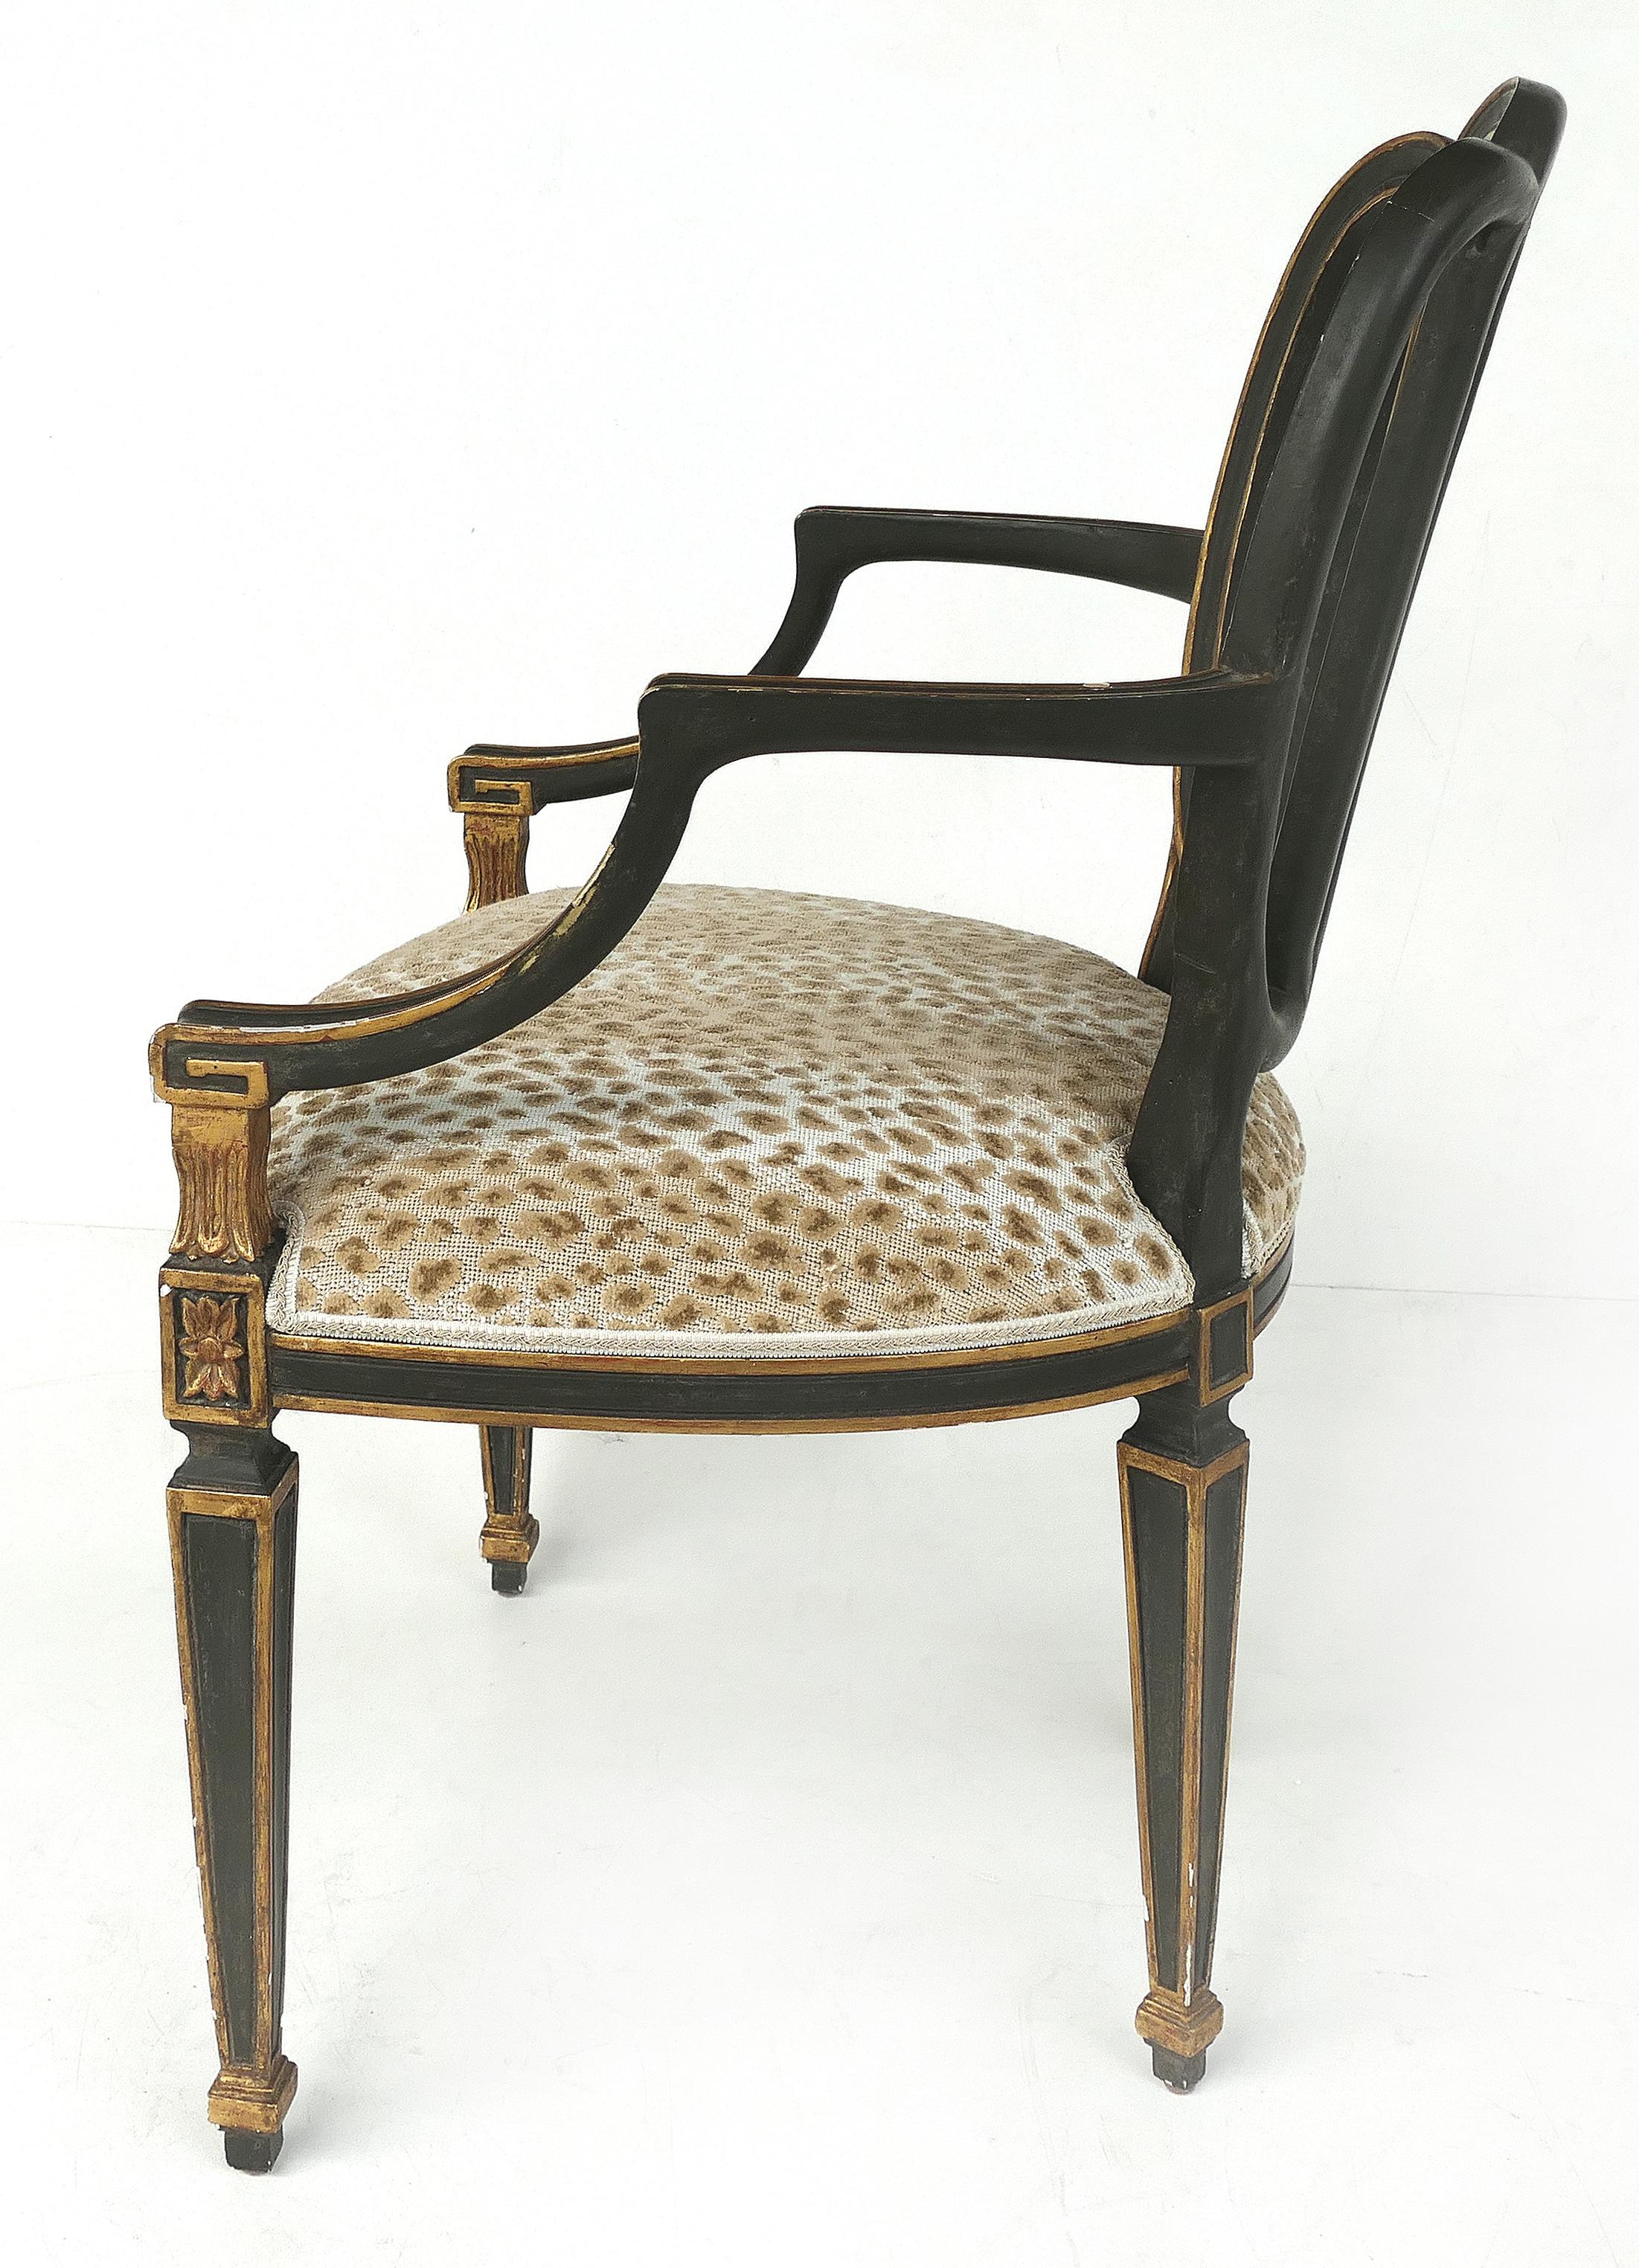 Wood Dennis & Leen Ebonized and Parcel-Gilt Armchairs in the Neoclassical Style